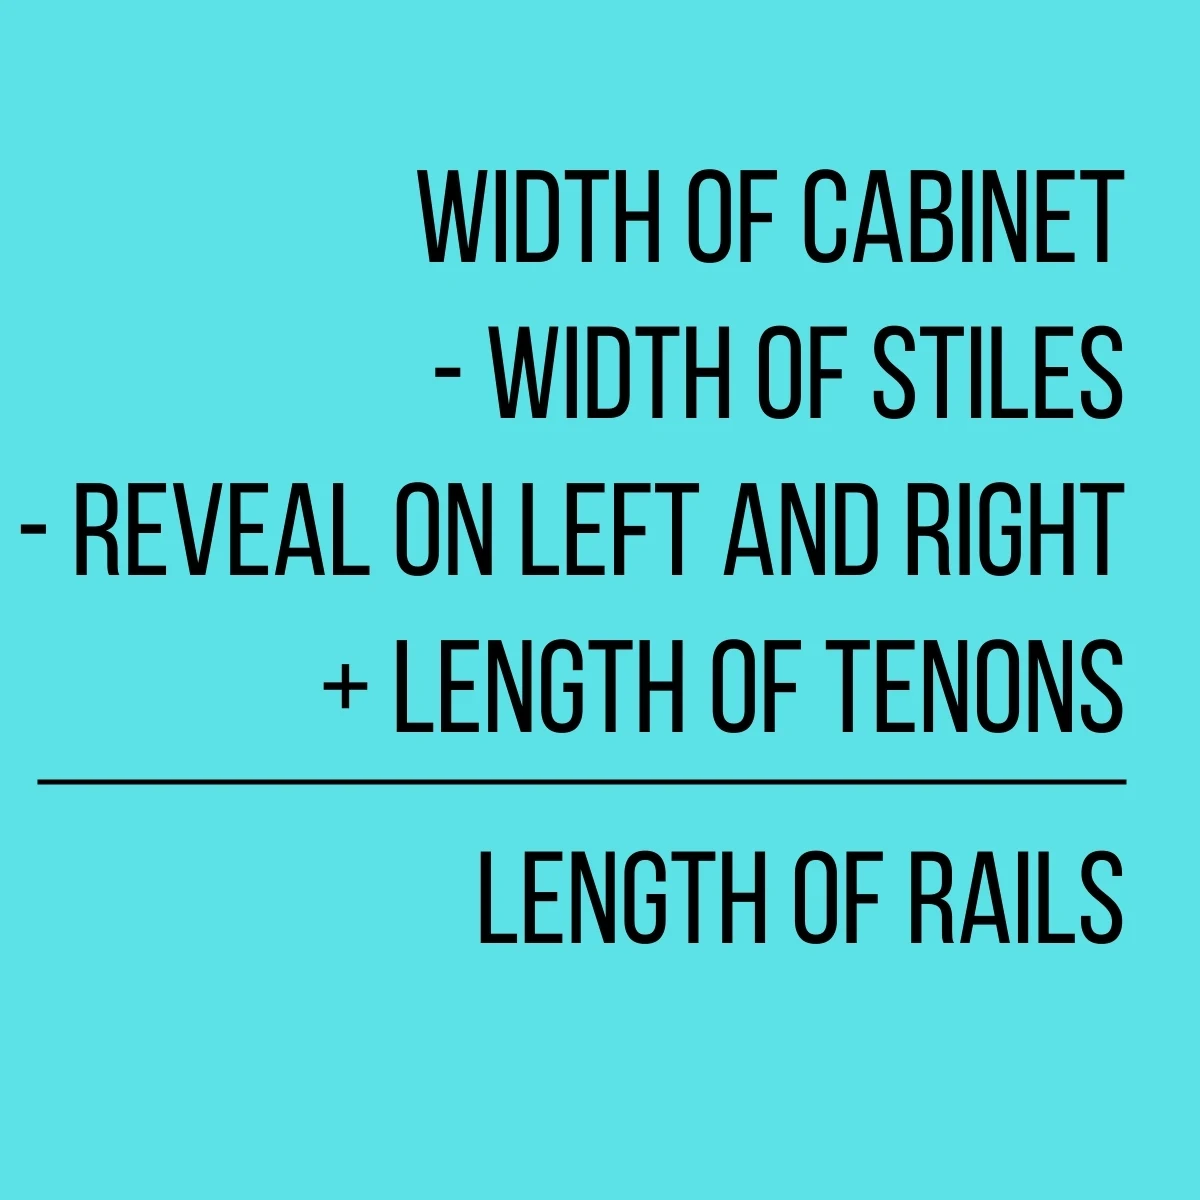 formula for calculating length of rails: width of cabinet minus width of stiles minus reveal on left and right plus length of tenons